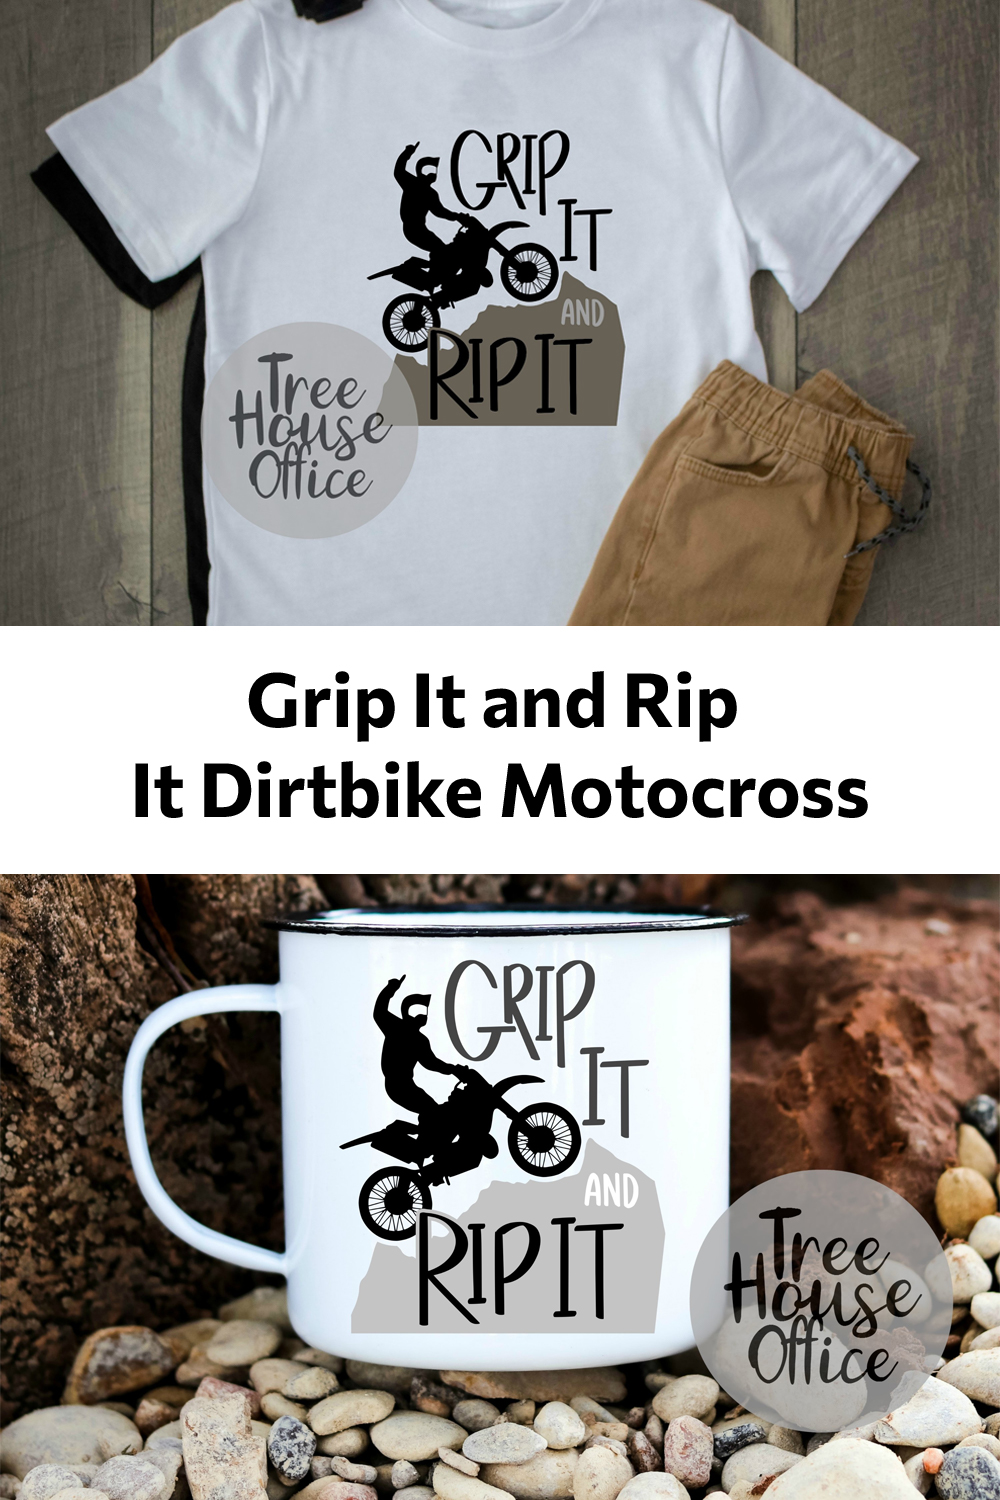 Grip it and rip it dirtbike of pinterest.